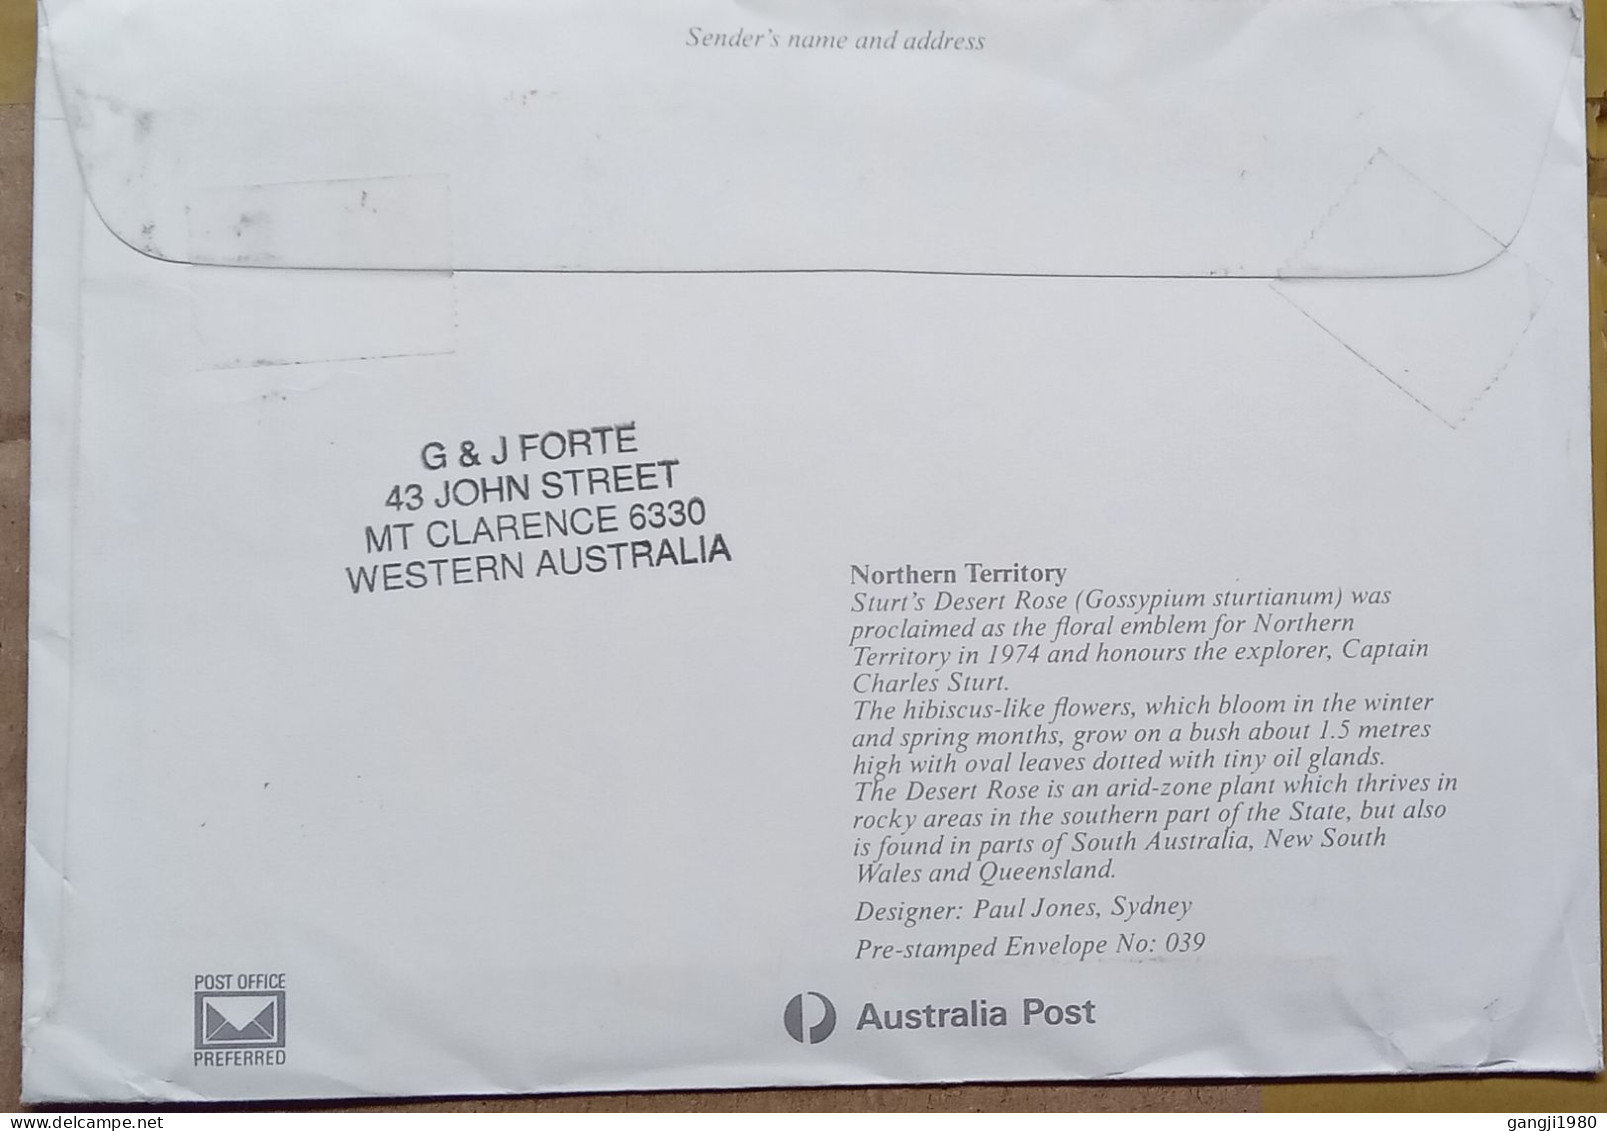 AUSTRALIA-2019, STATIONERY COVER, USED TO INDIA, FLOWER, BIRD, 6 DIFF, DIRK HARTOGE SHIP, LICENCE INSPECTED, ALBANY CITY - Lettres & Documents